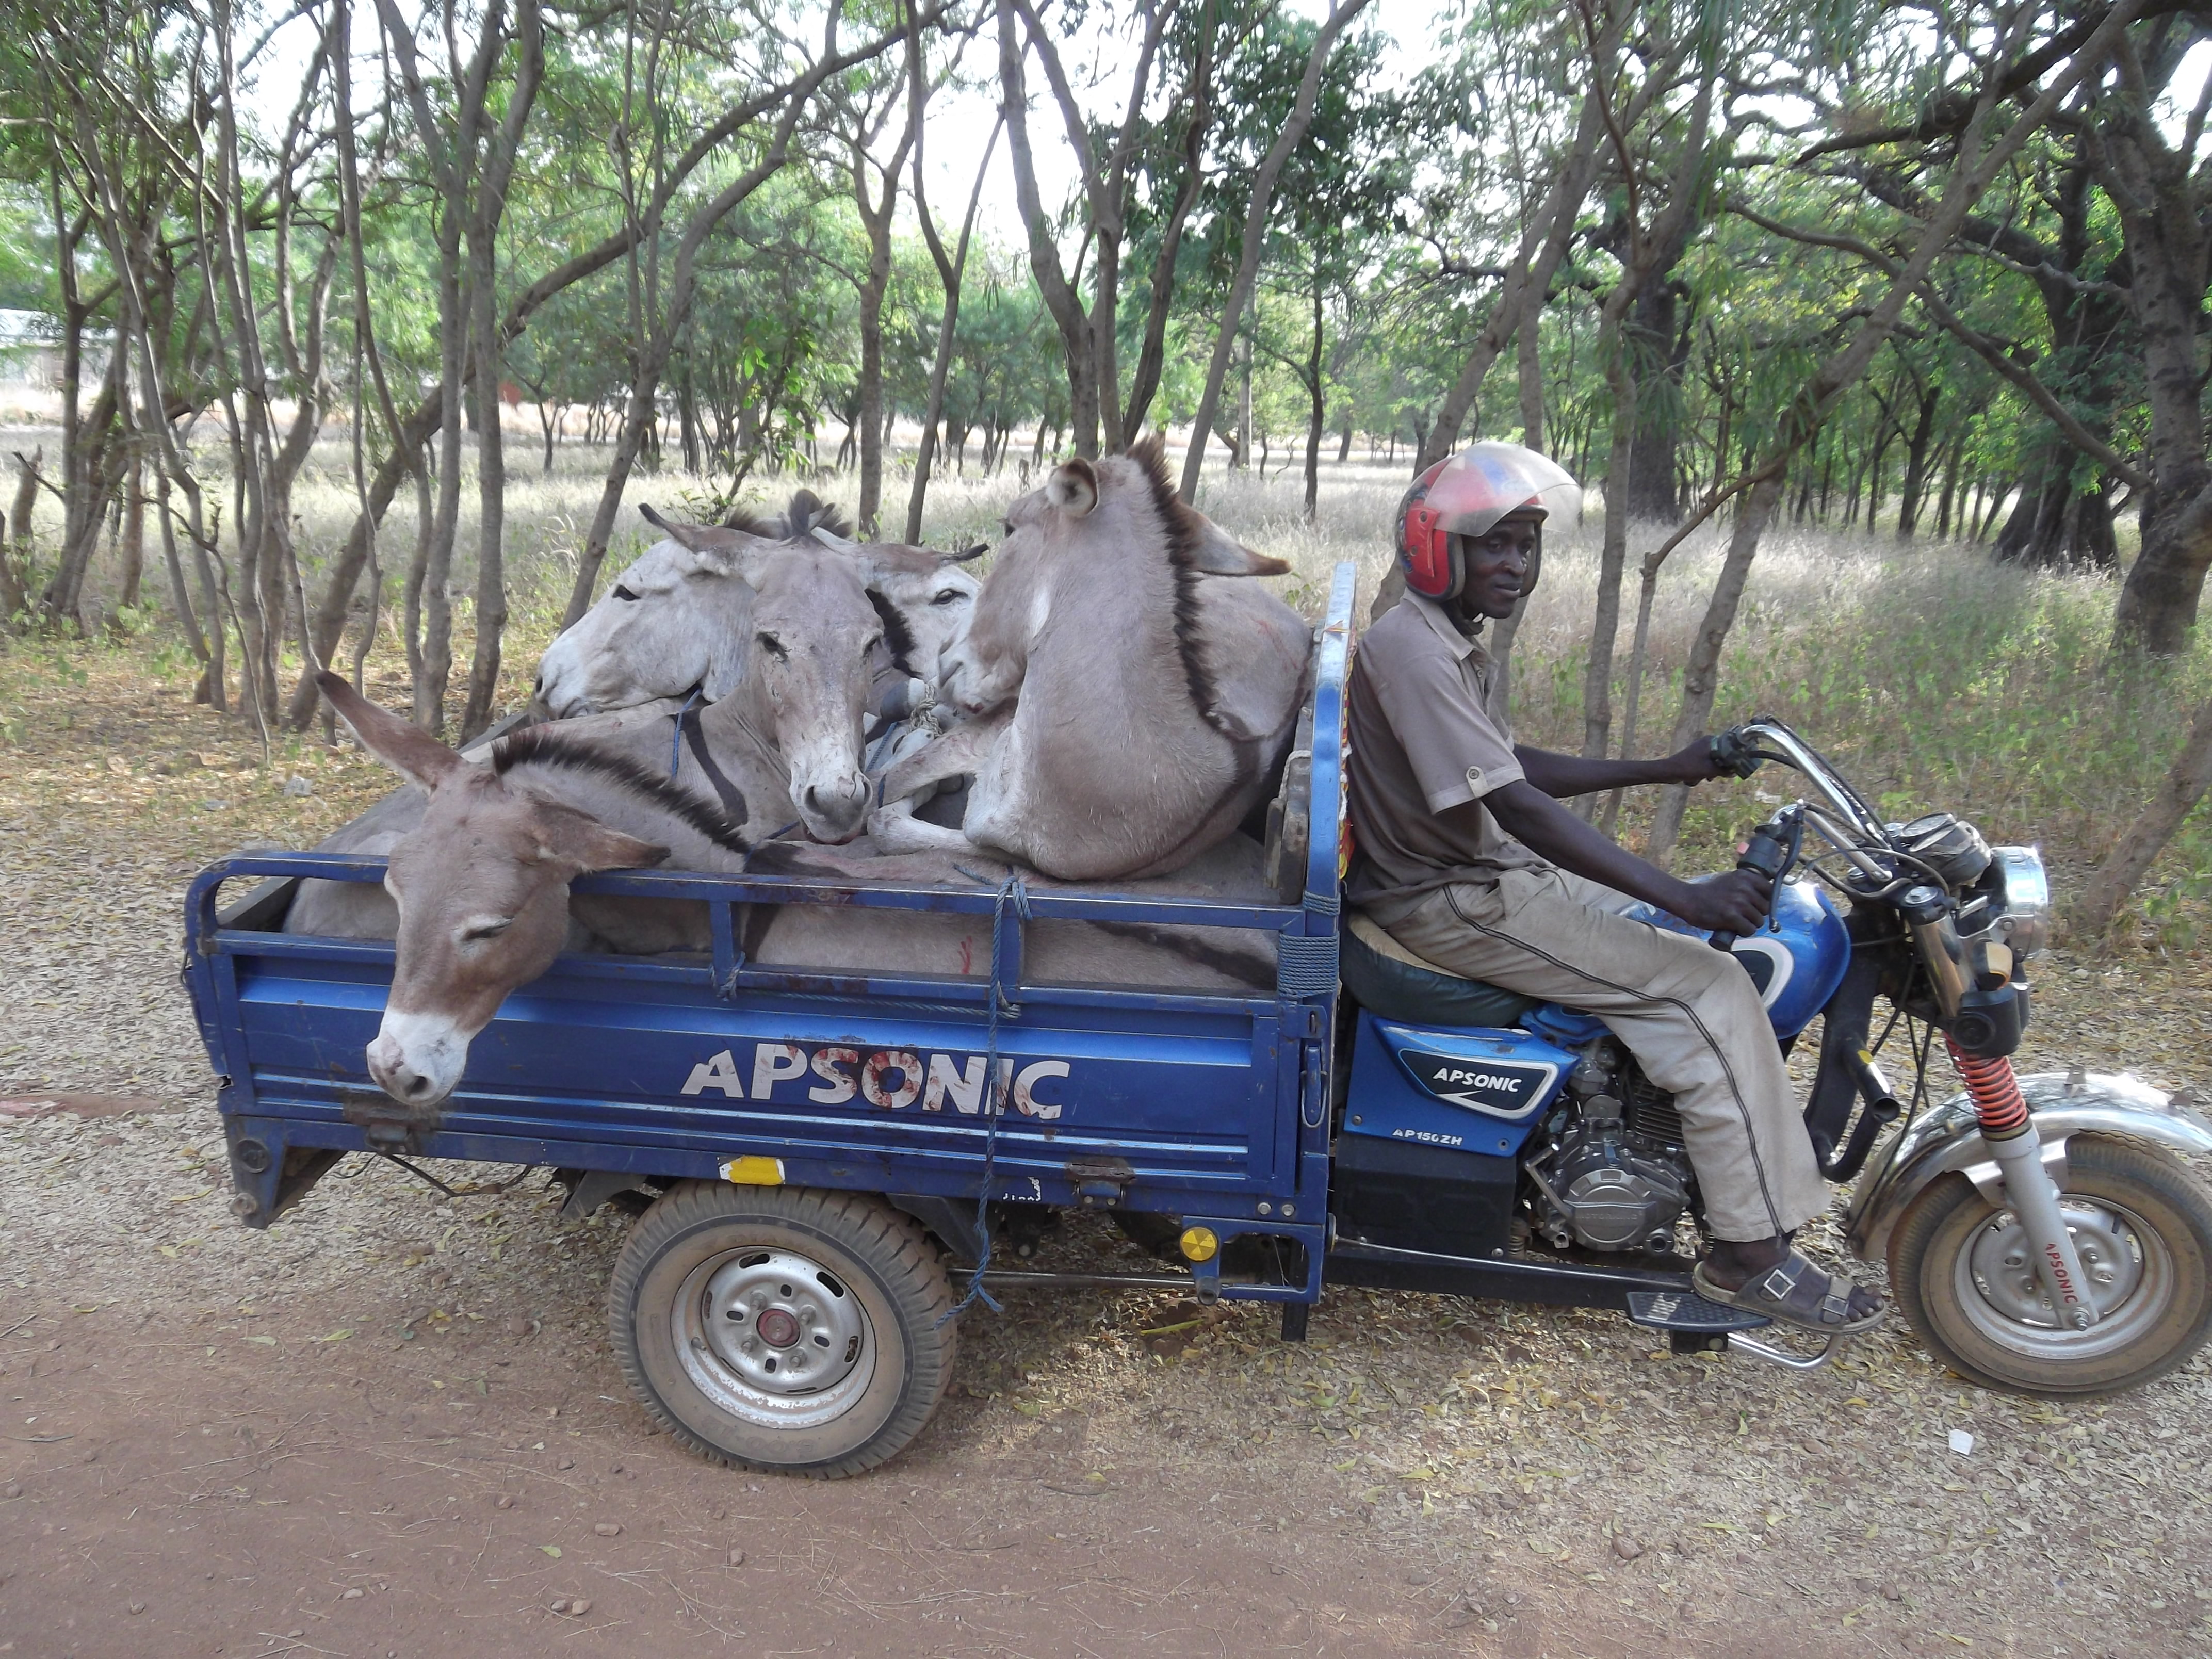 How many donkeys can you load into a Moto-king?